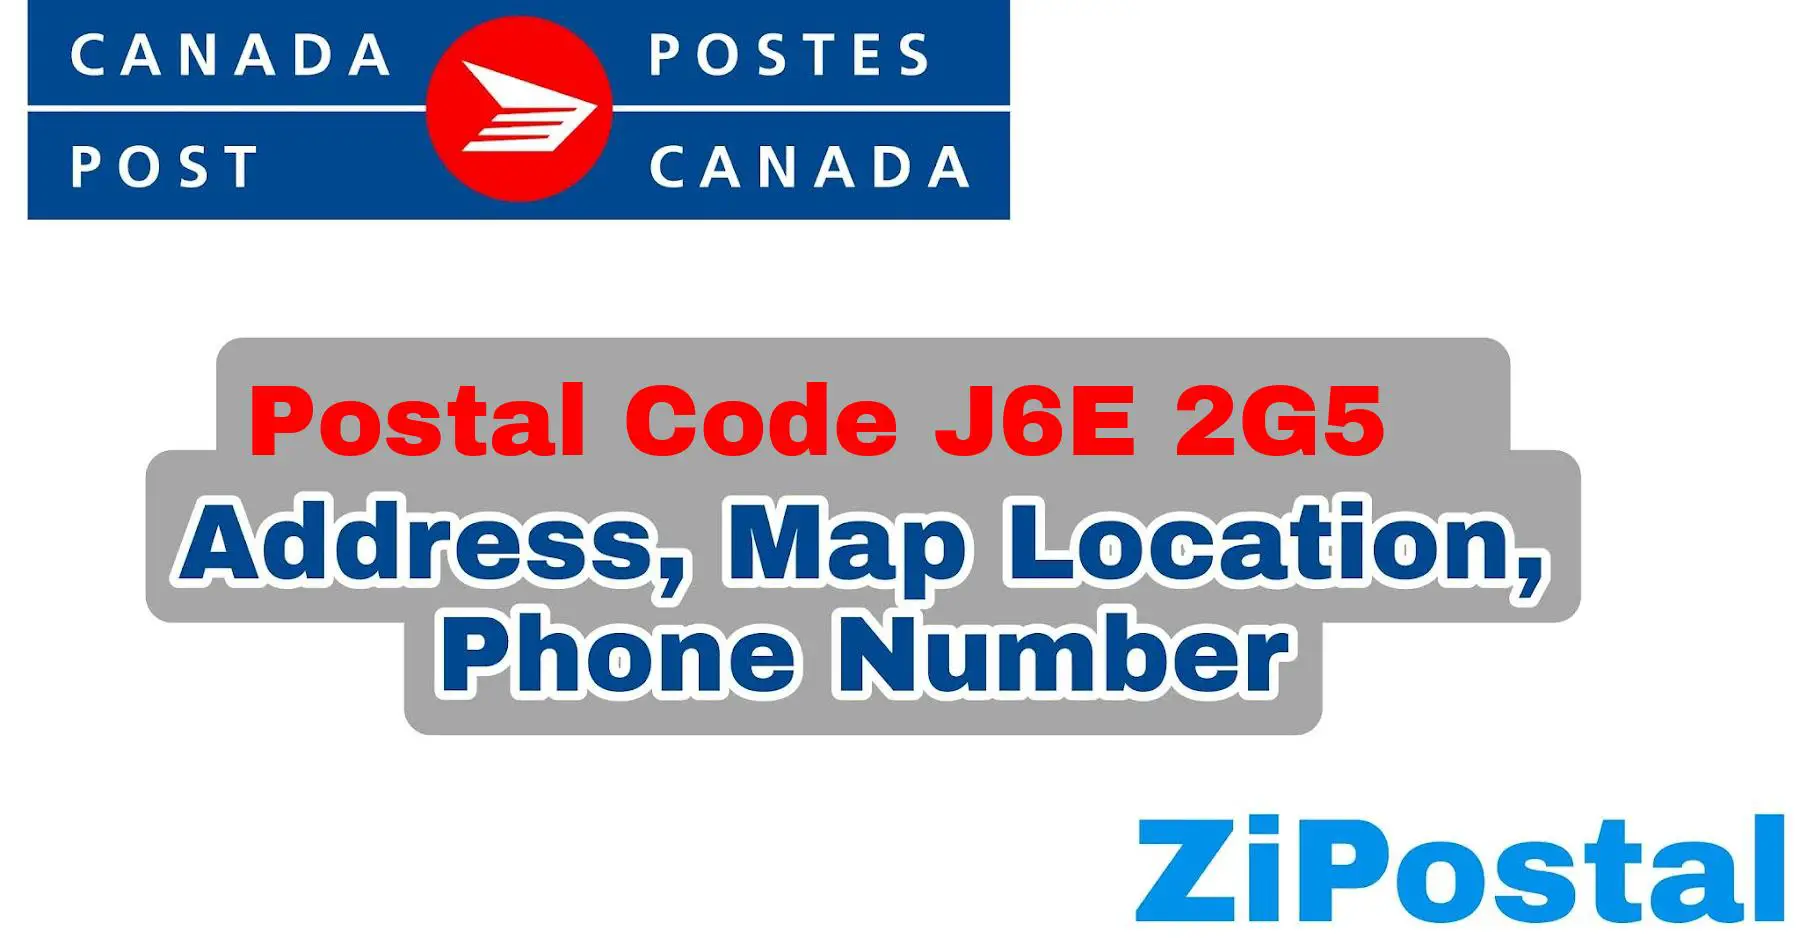 Postal Code J6E 2G5 Address Map Location and Phone Number